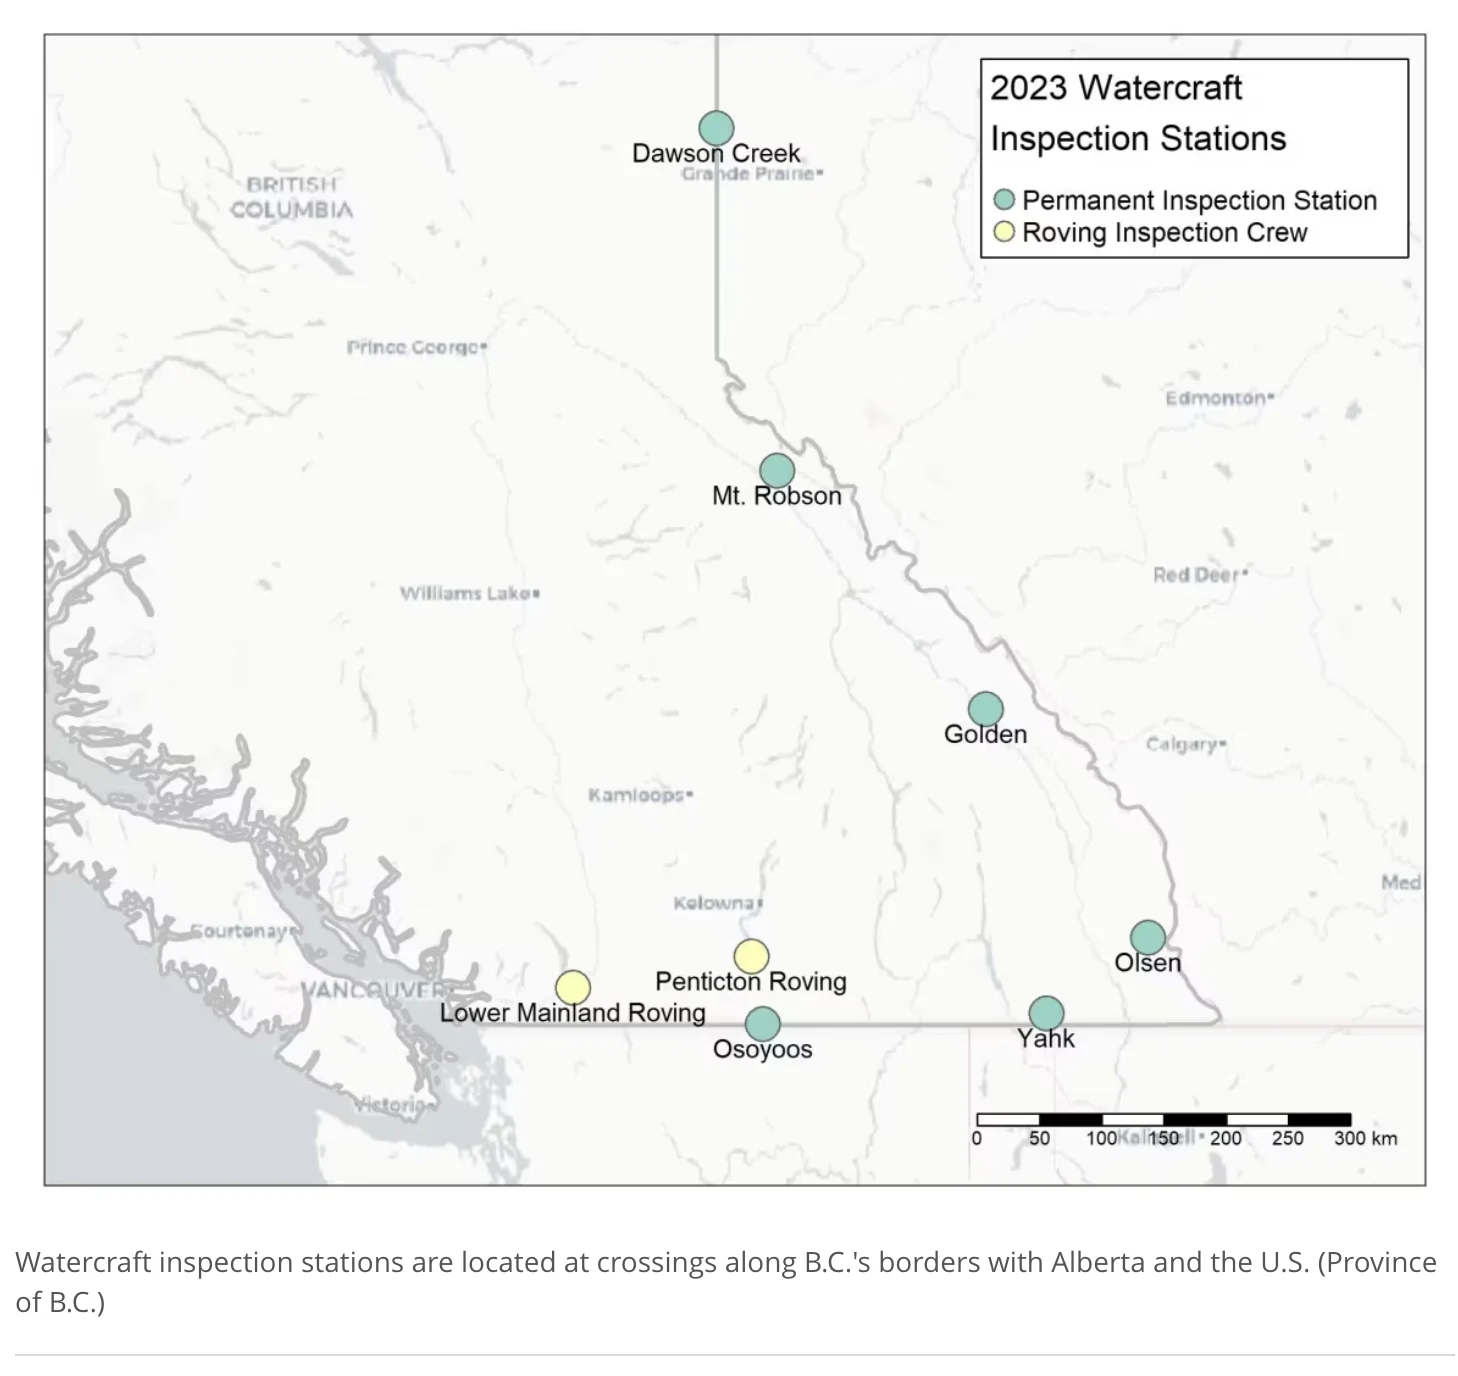 Province of B.C.: Watercraft inspection stations are located at crossings along B.C.'s borders with Alberta and the U.S. (Province of B.C.)